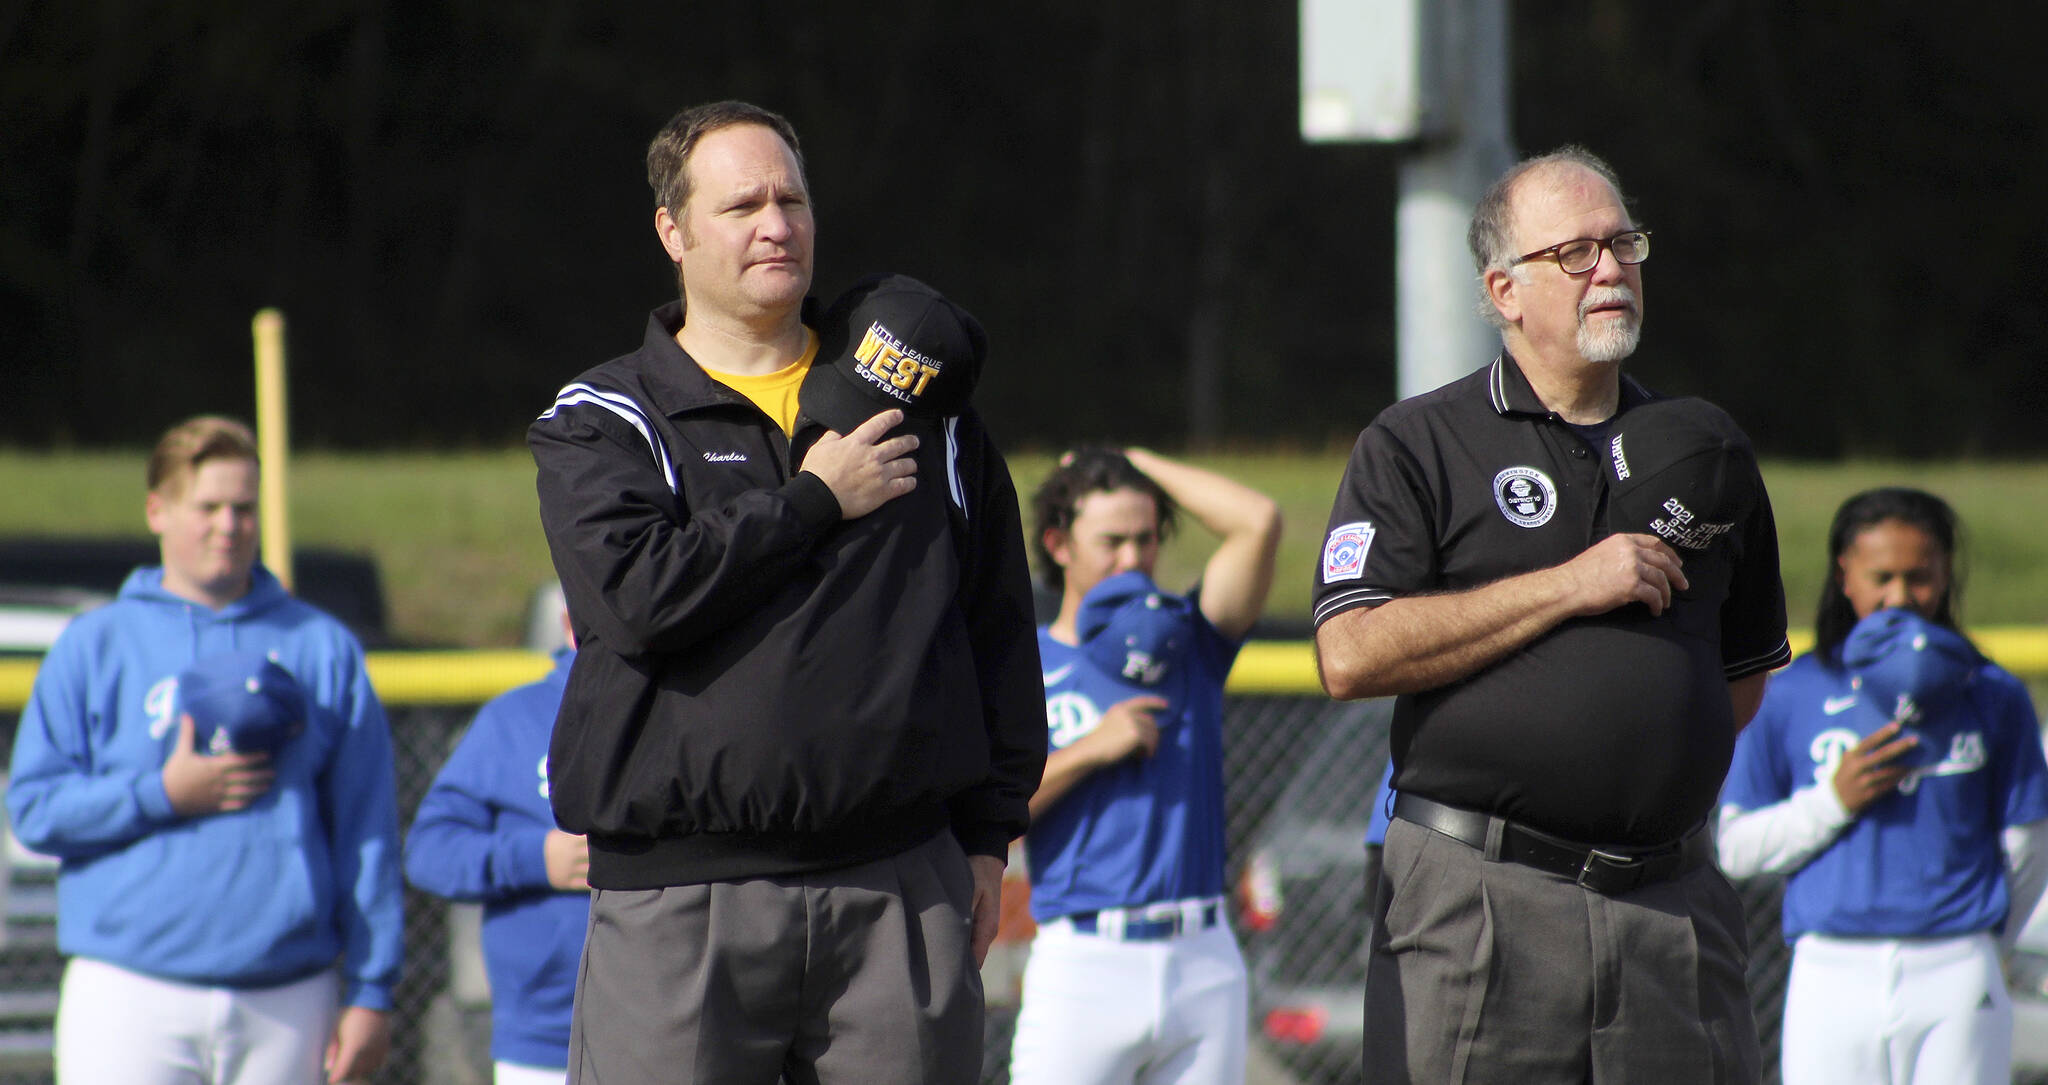 Federal Way National Little League President Charles Heitman, left, and Umpire in Chief Phillip Clark place their hats over their hearts during the National Anthem on April 23. Olivia Sullivan/the Mirror